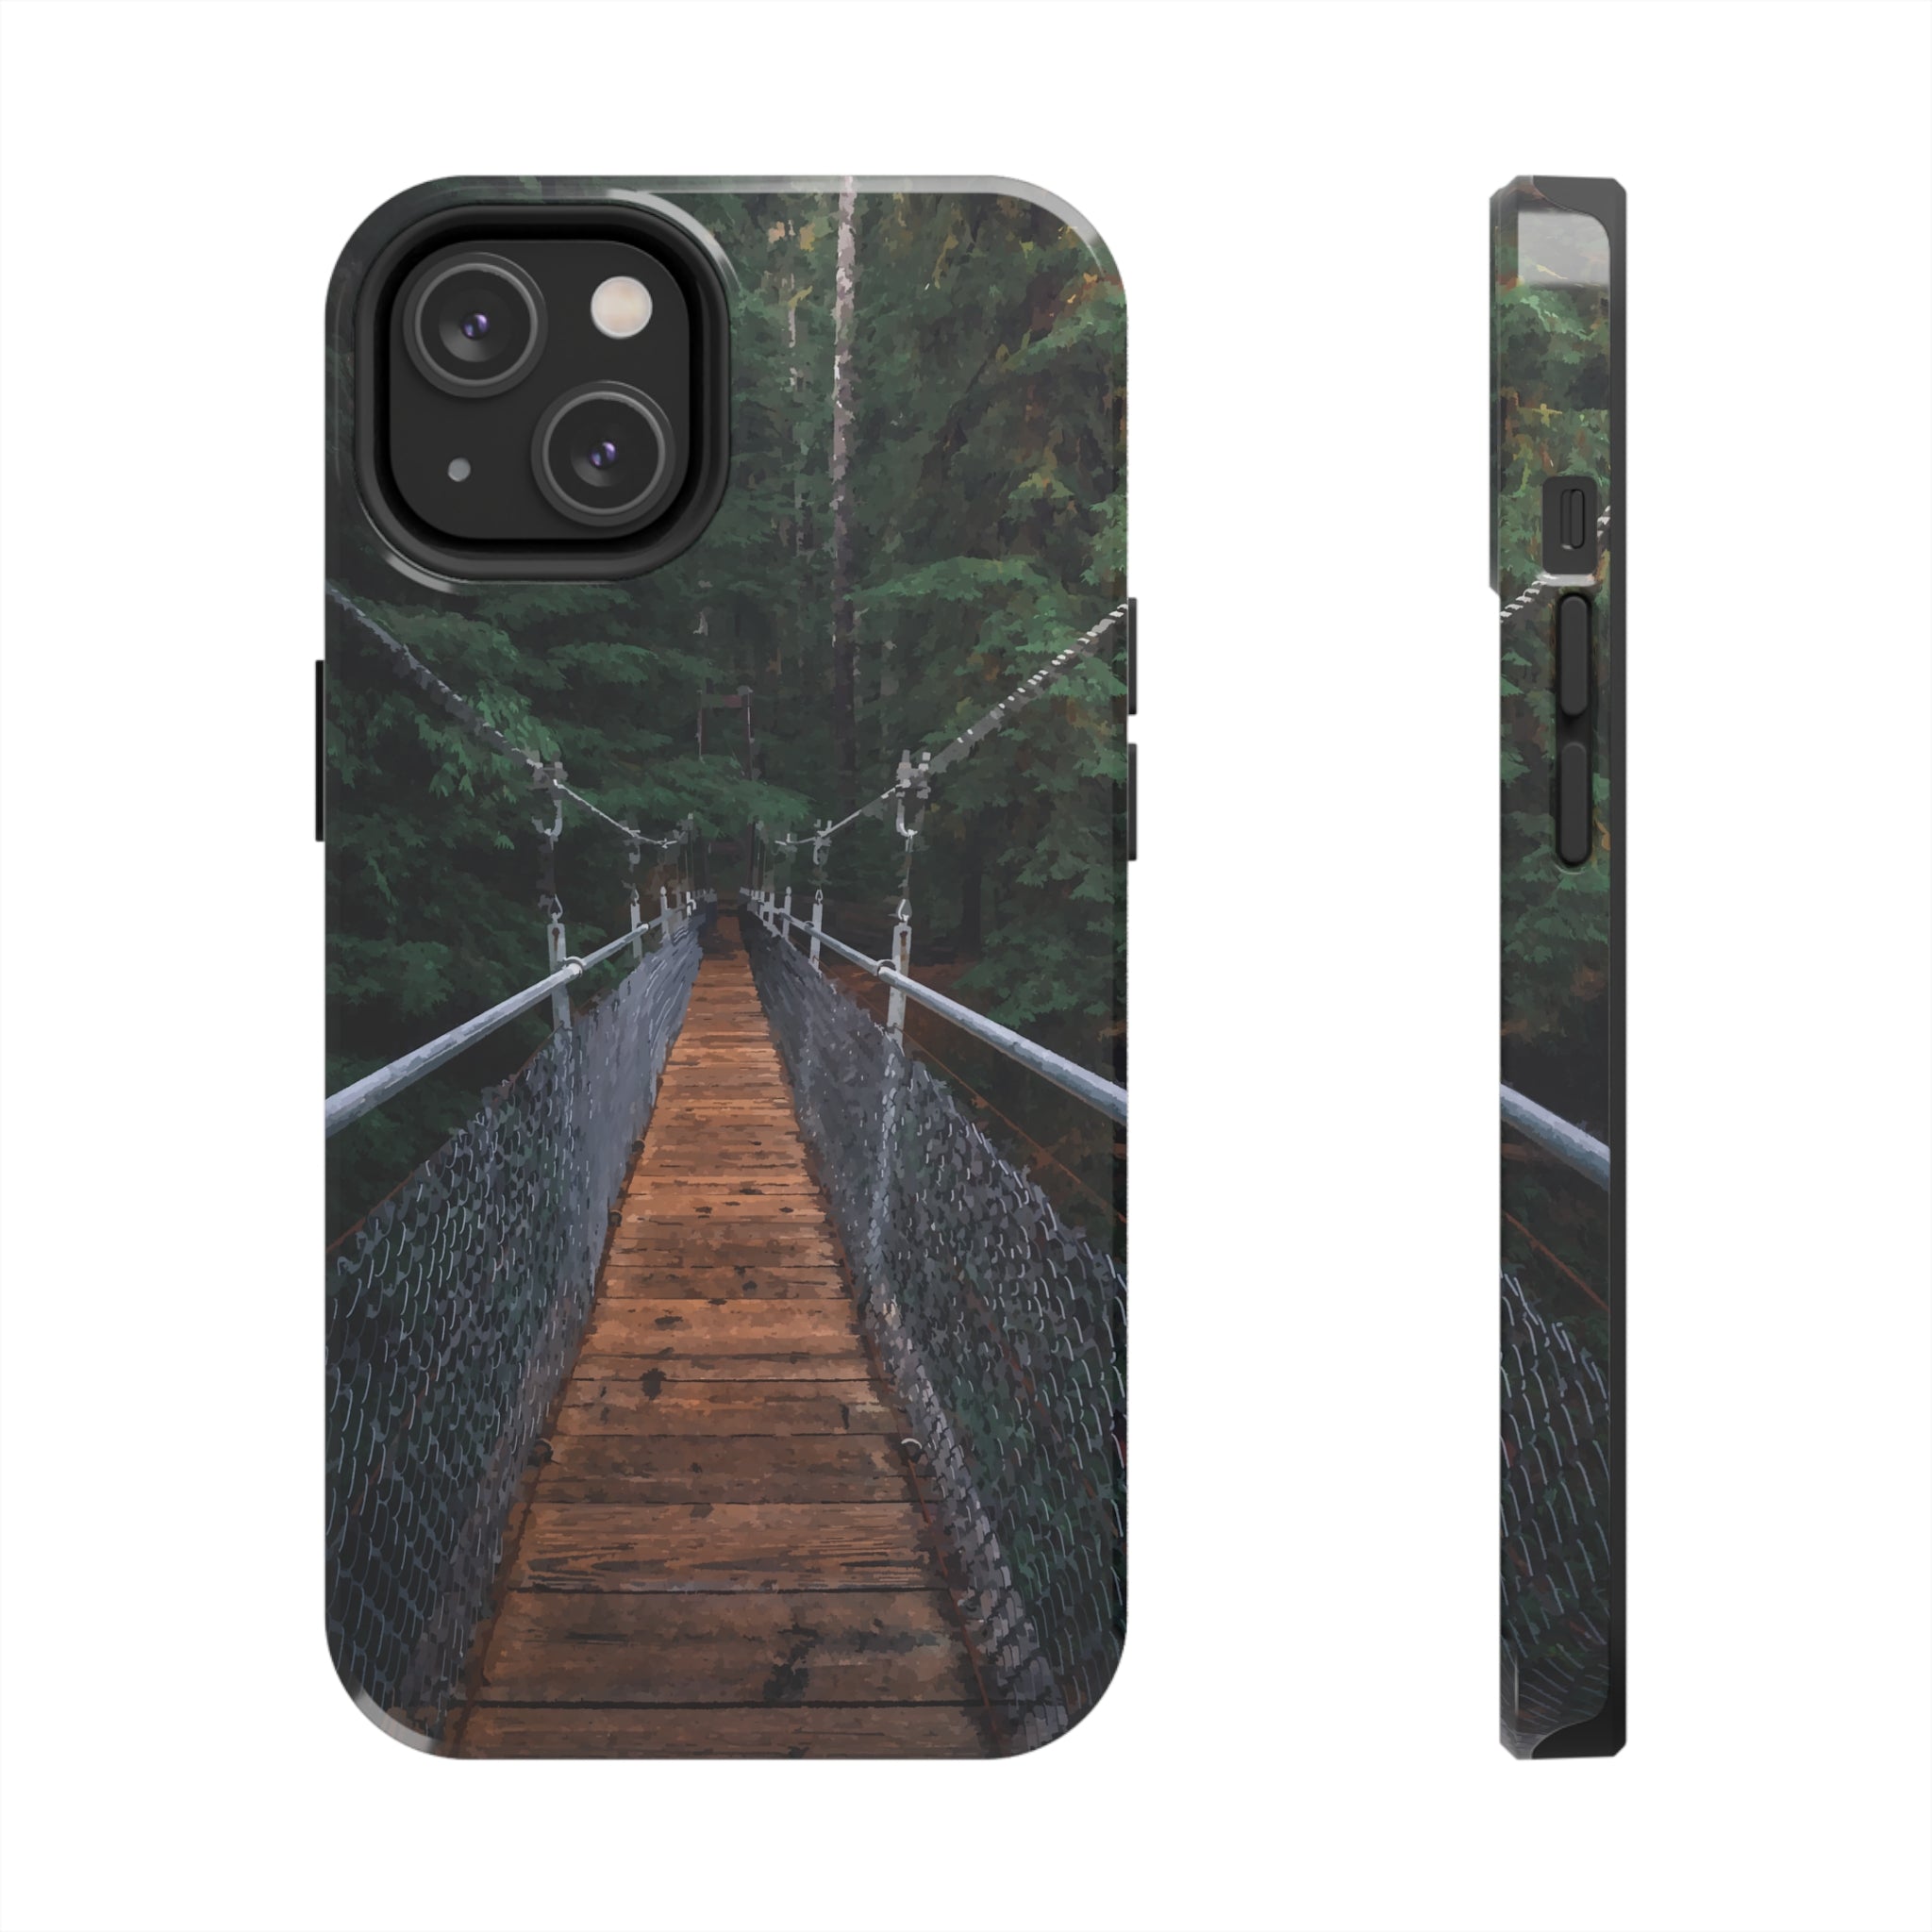 Main image of Jungle Expedition iPhone Case